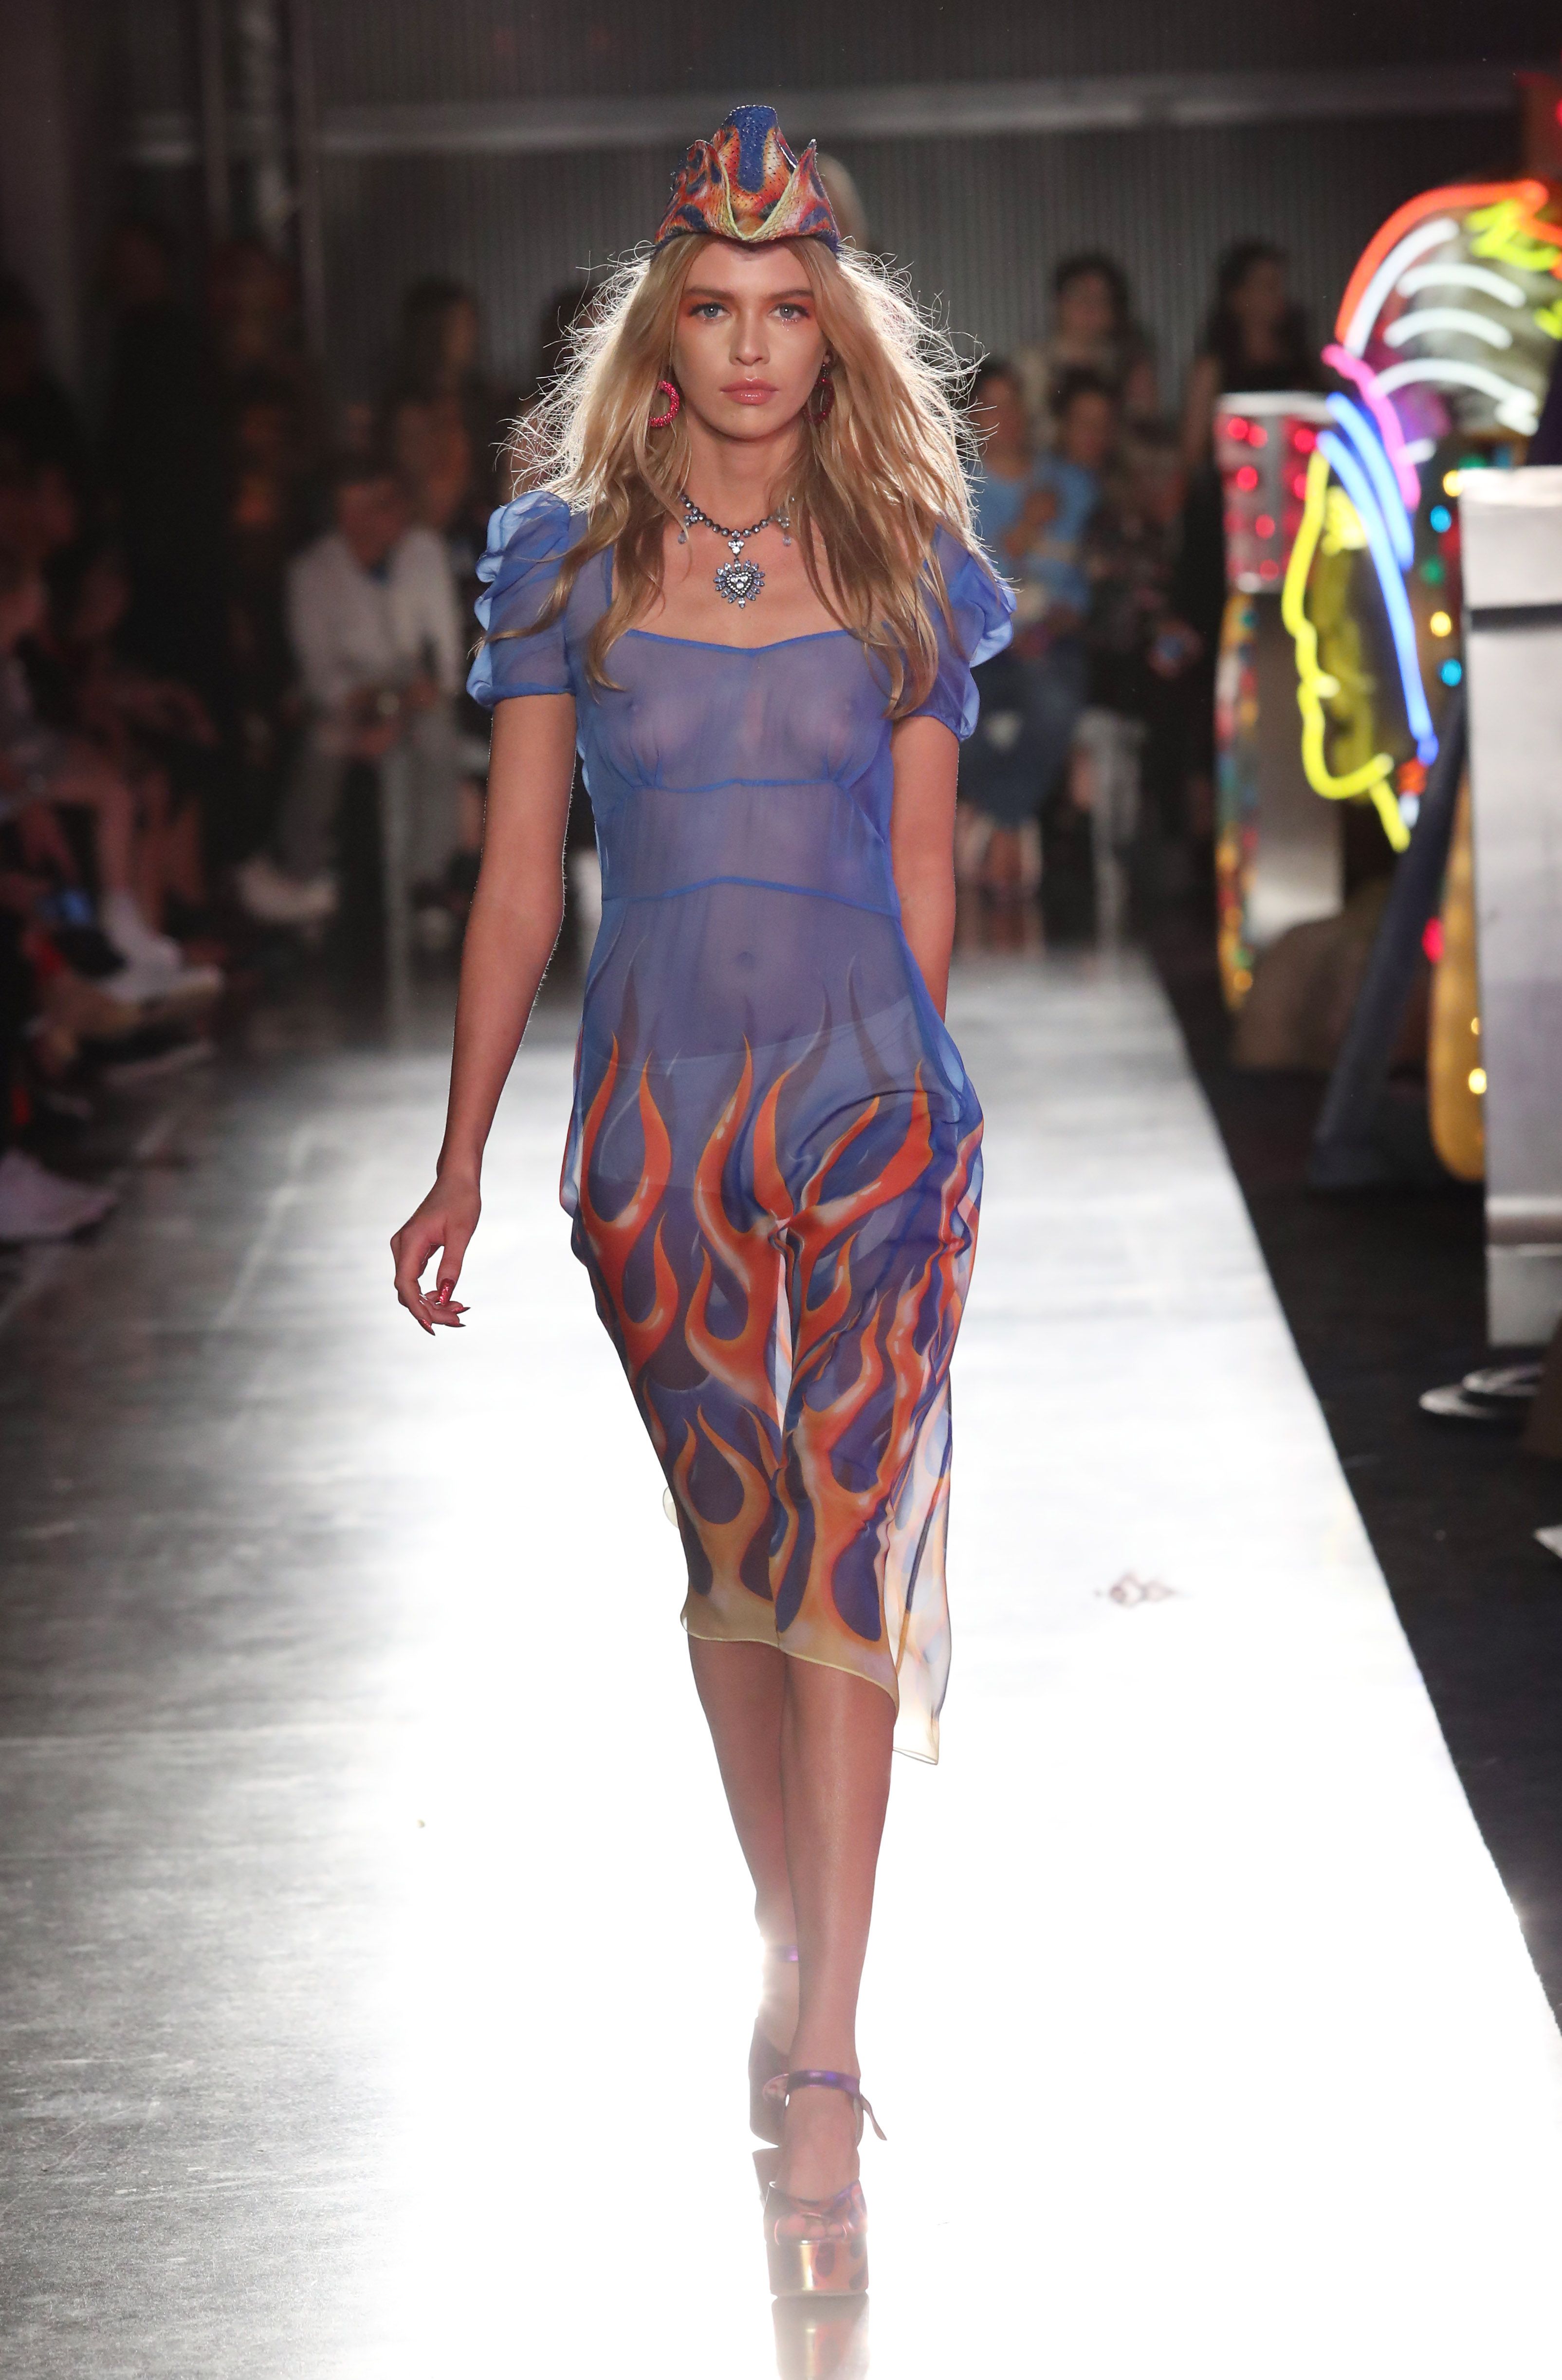 Stella Maxwell In A Transparent Get-Up #79632958